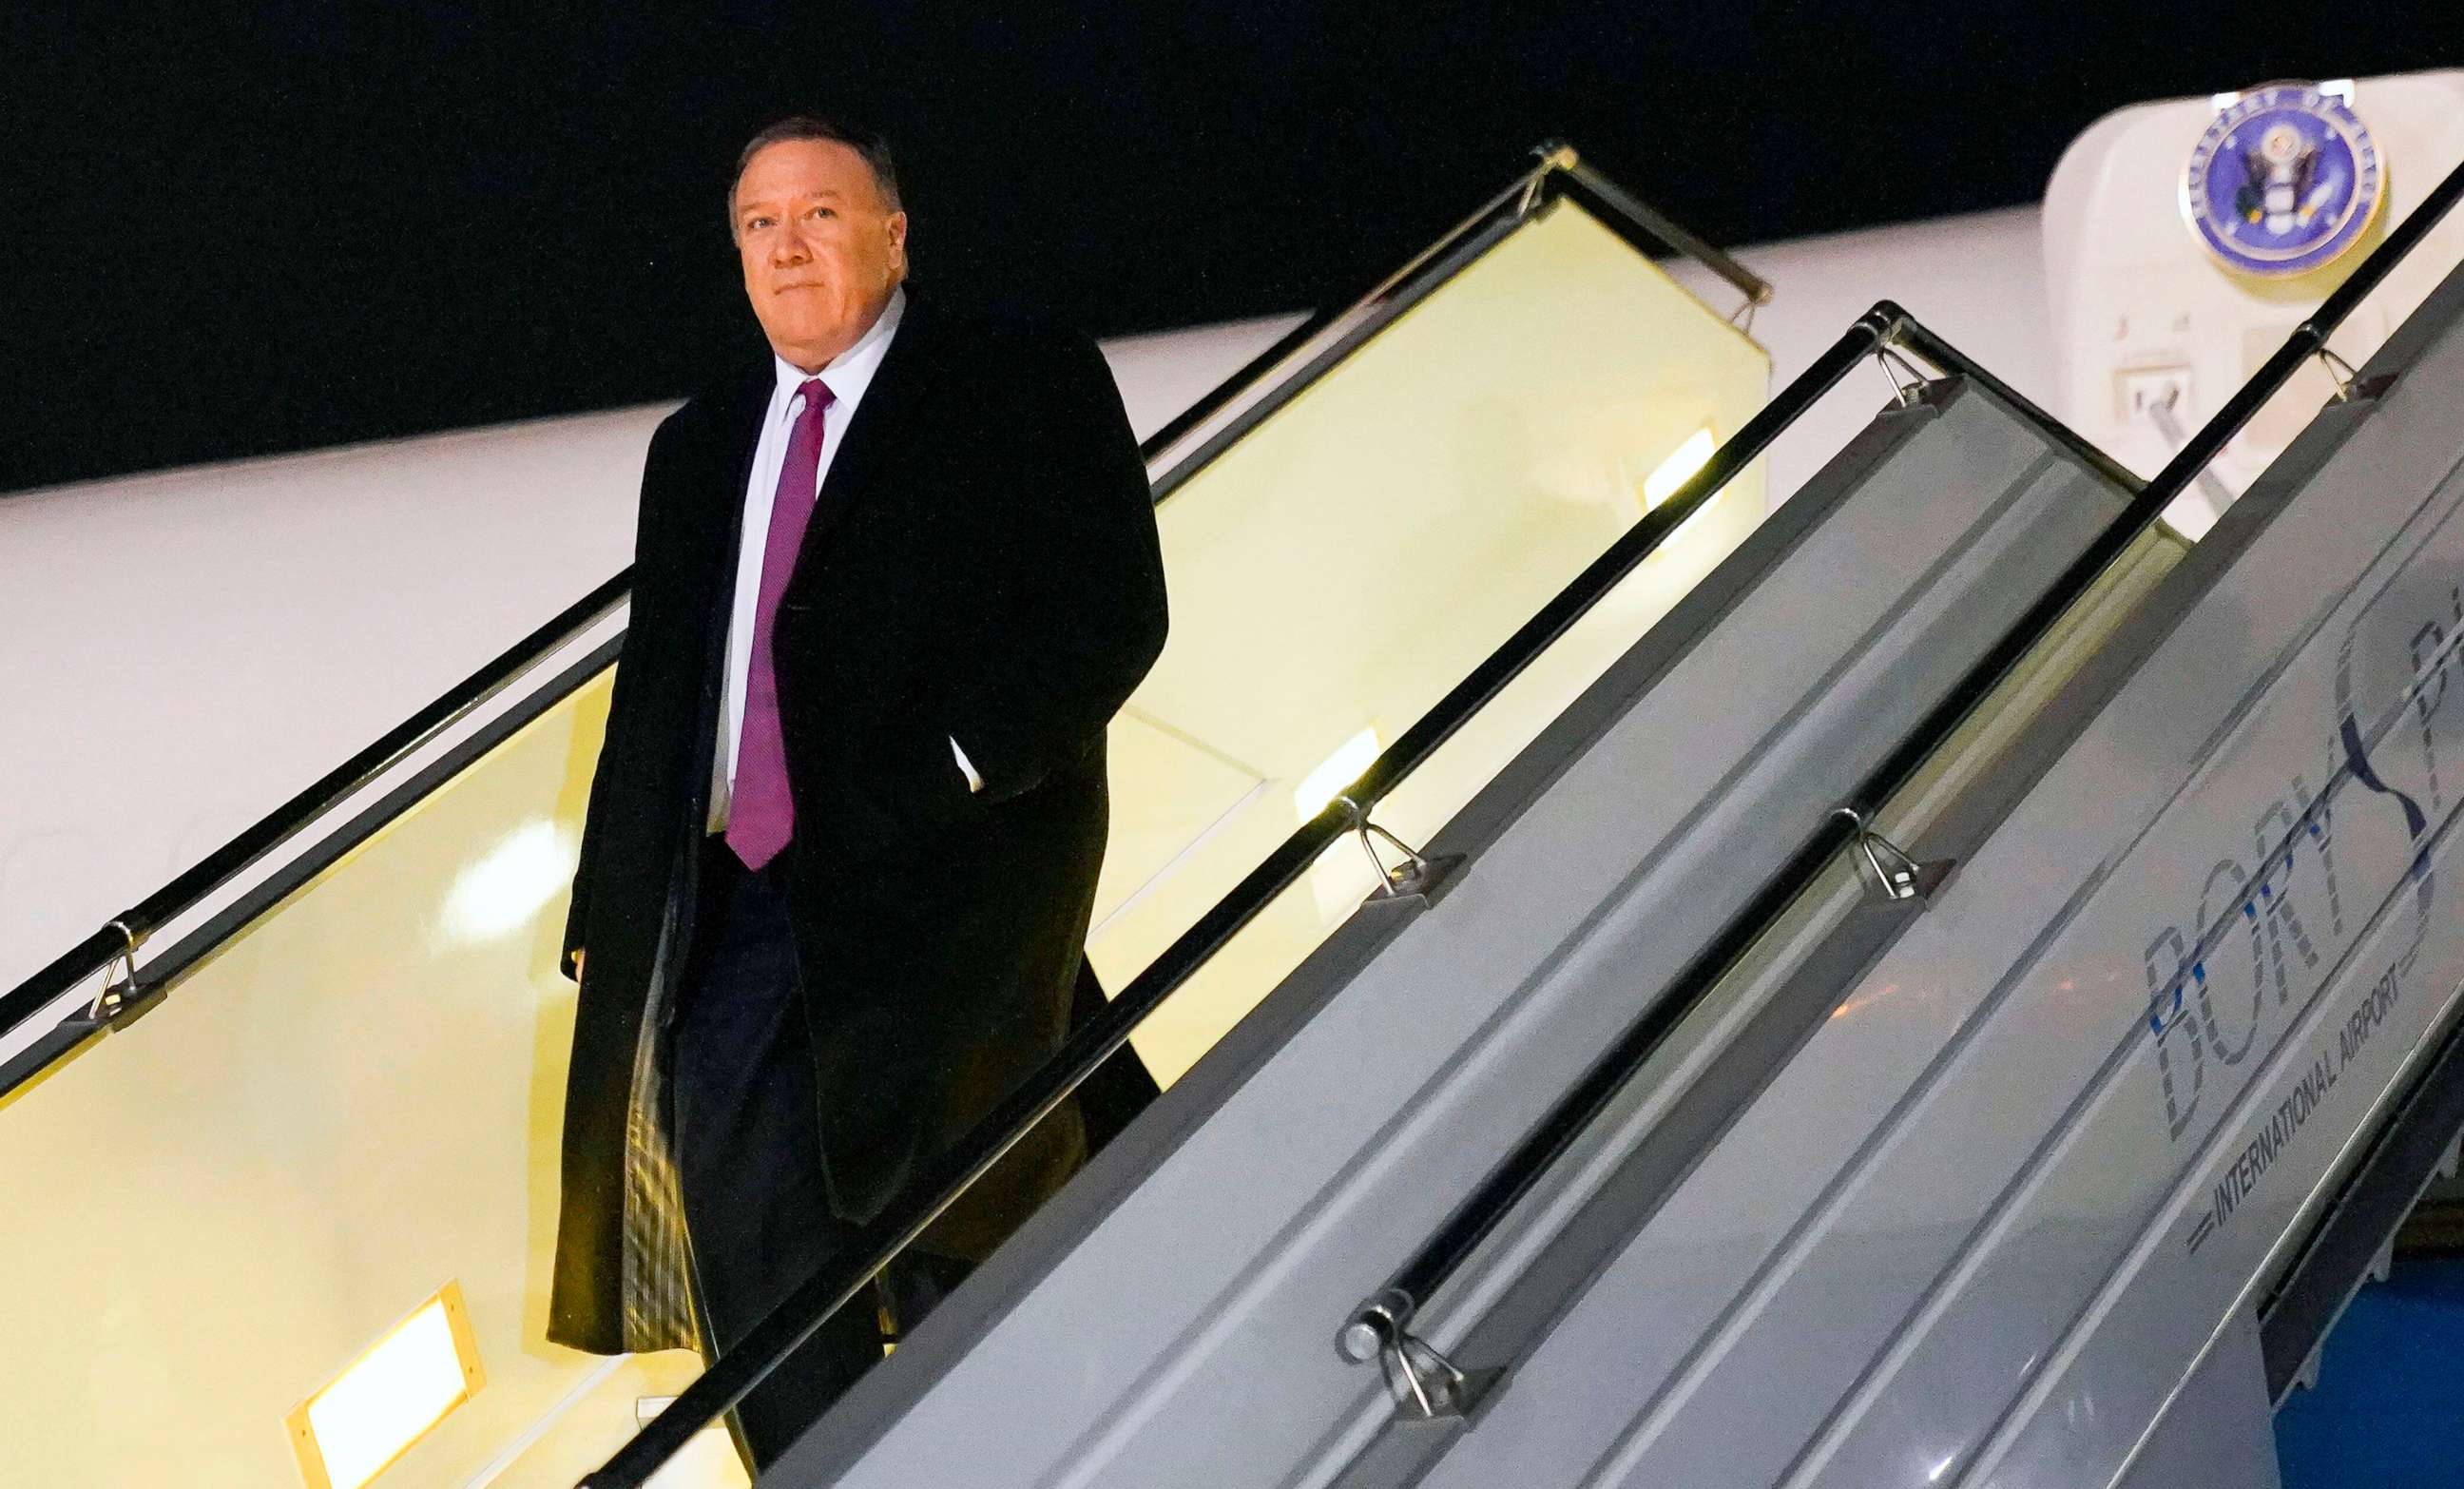 PHOTO: Secretary of State Mike Pompeo steps off a plane upon arrival in Kyiv, Ukraine on Jan 30, 2020.